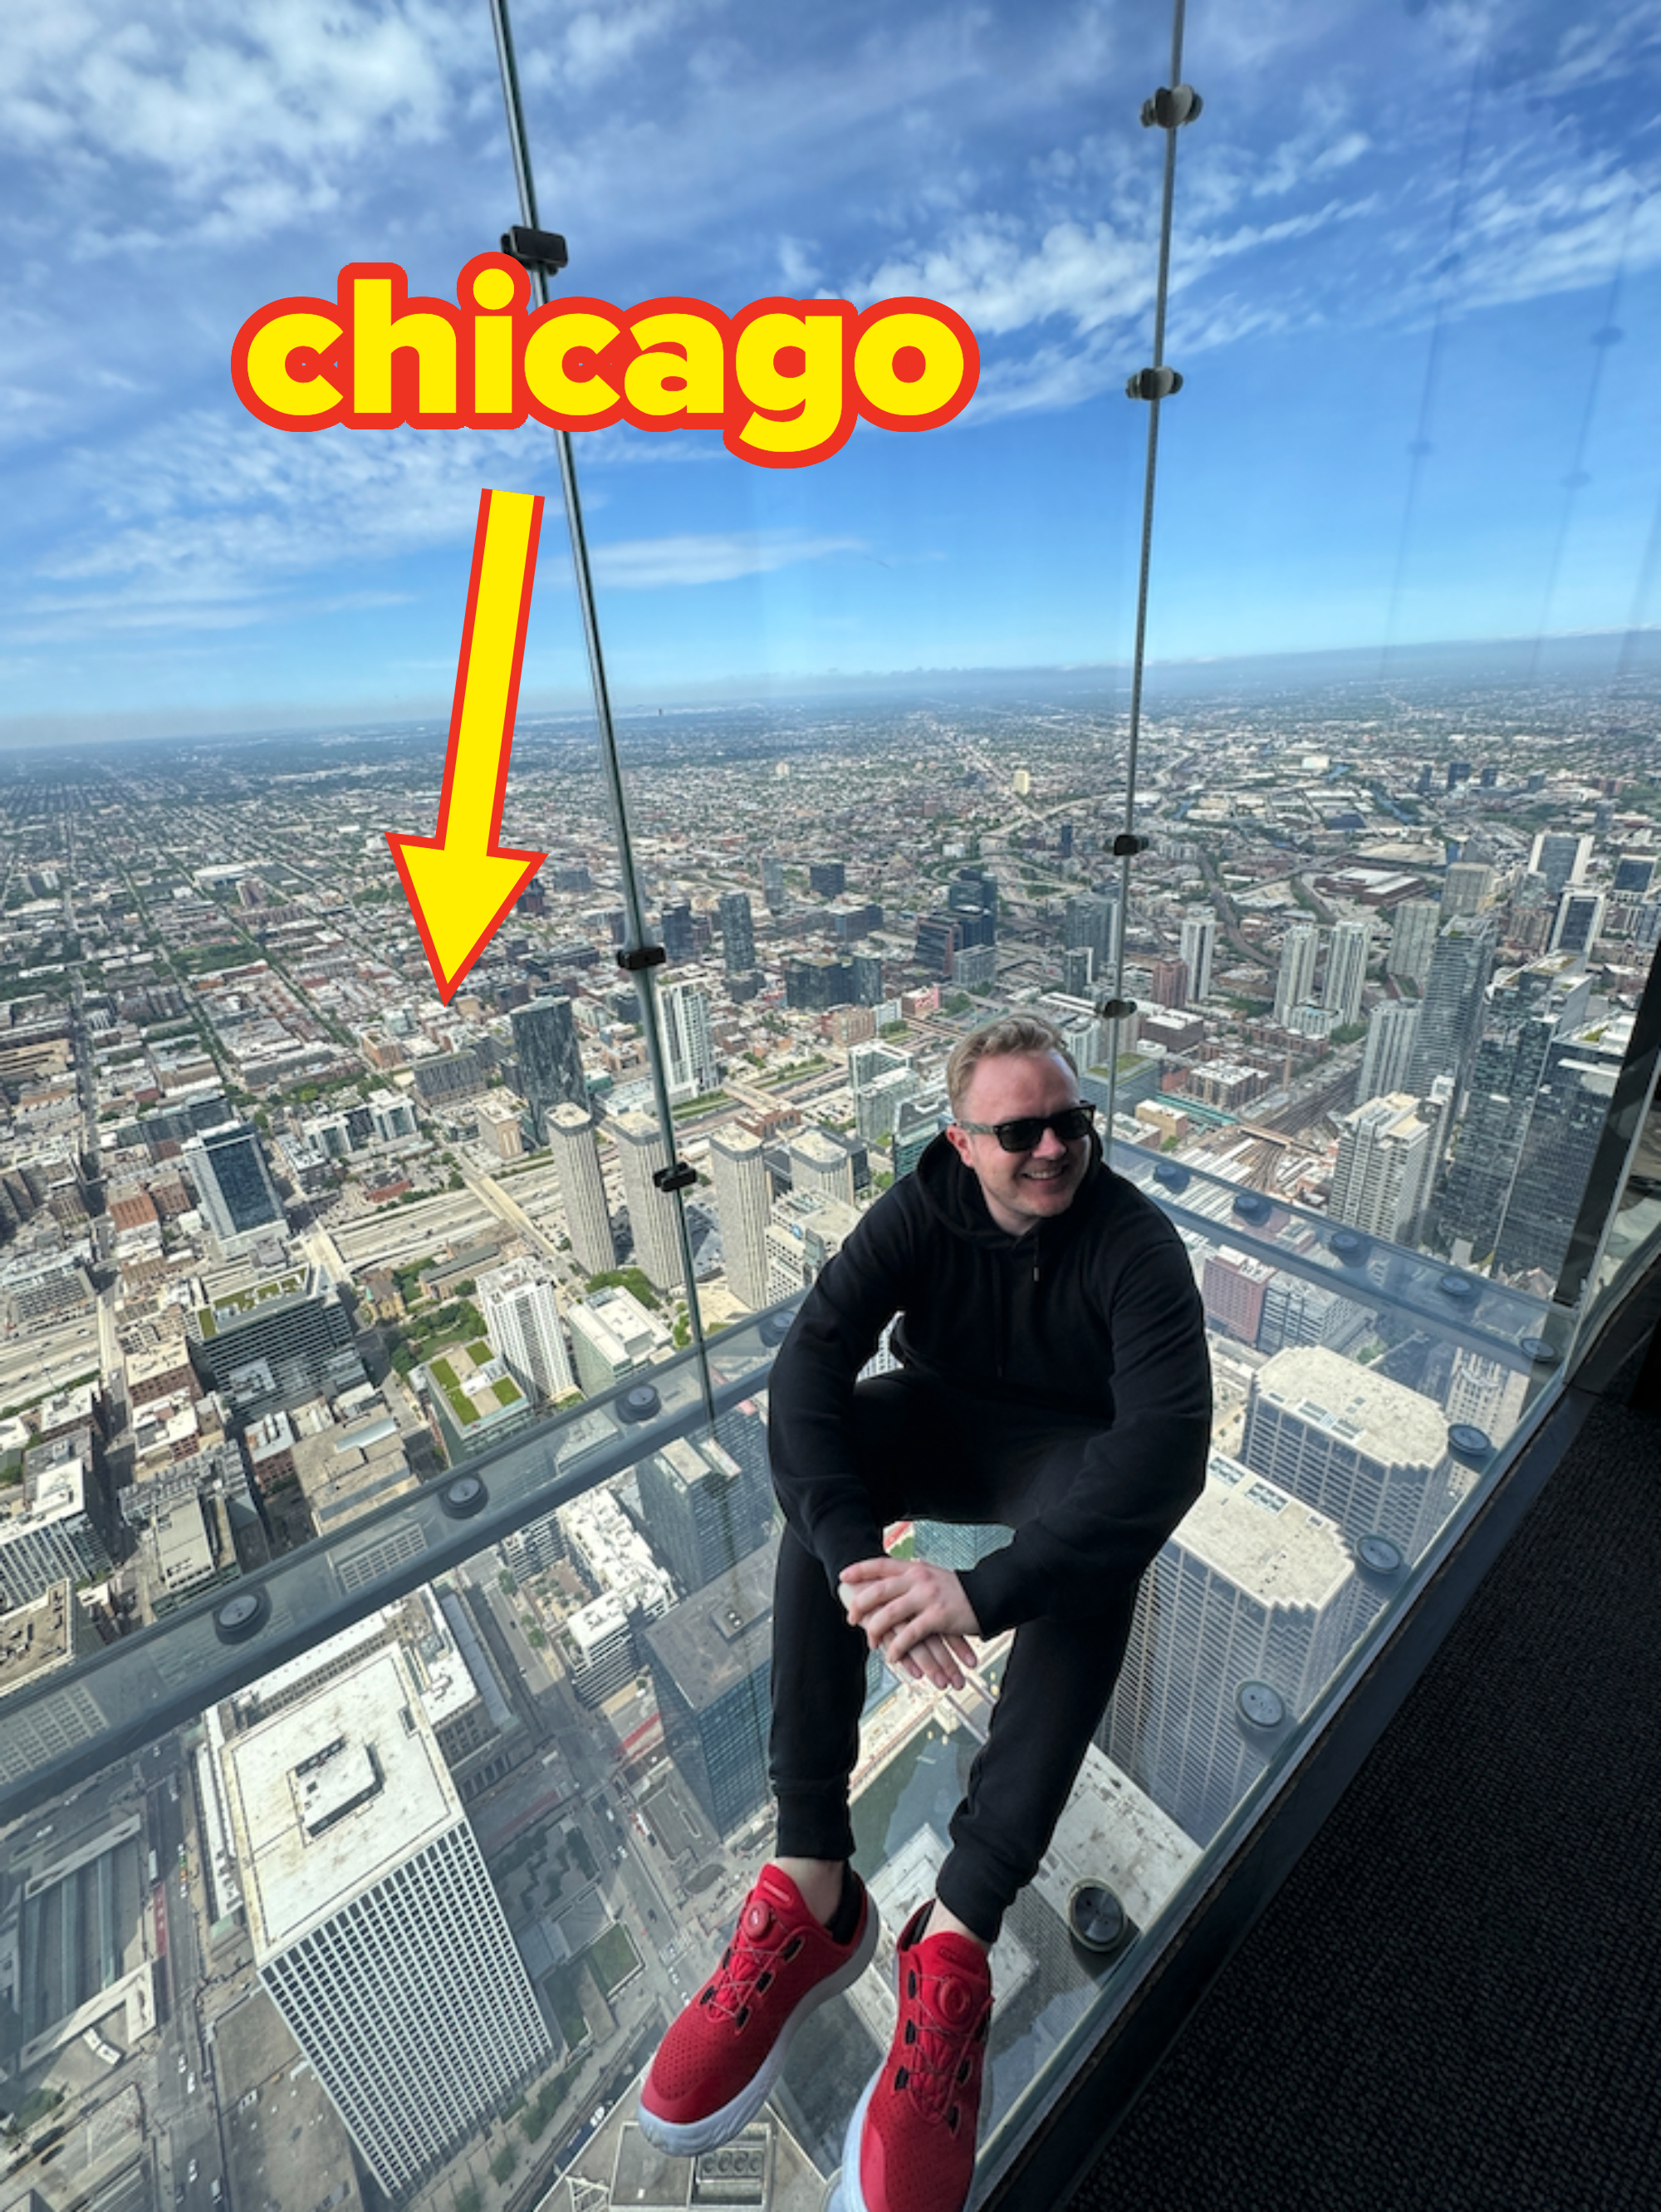 Person sitting on glass floor high above city landscape